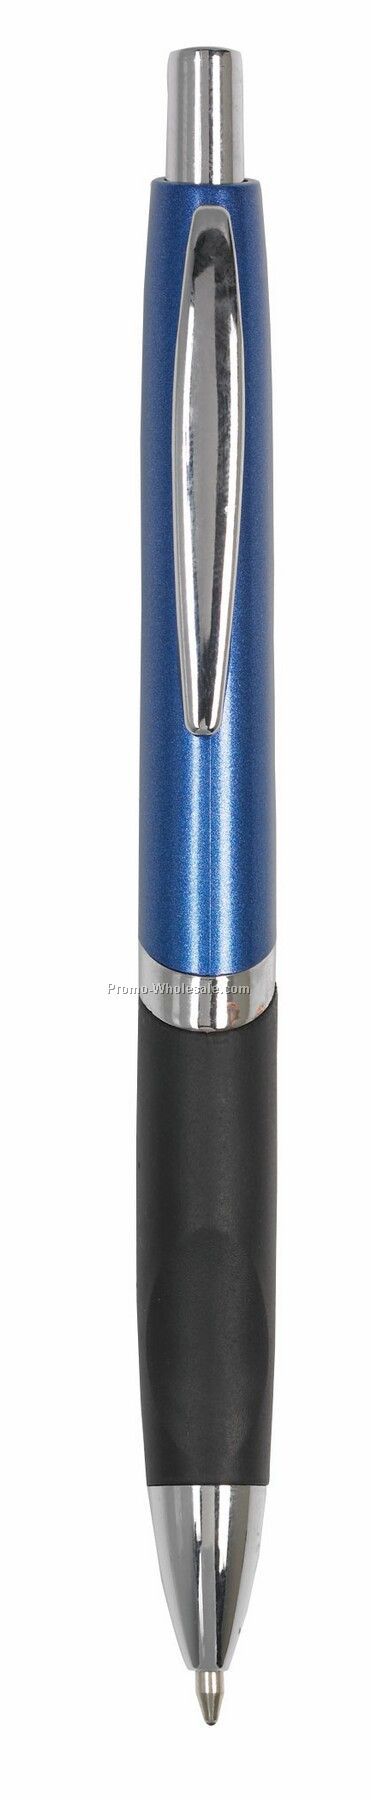 Orion Metallic Color Barrel Pen With Tapered Grip